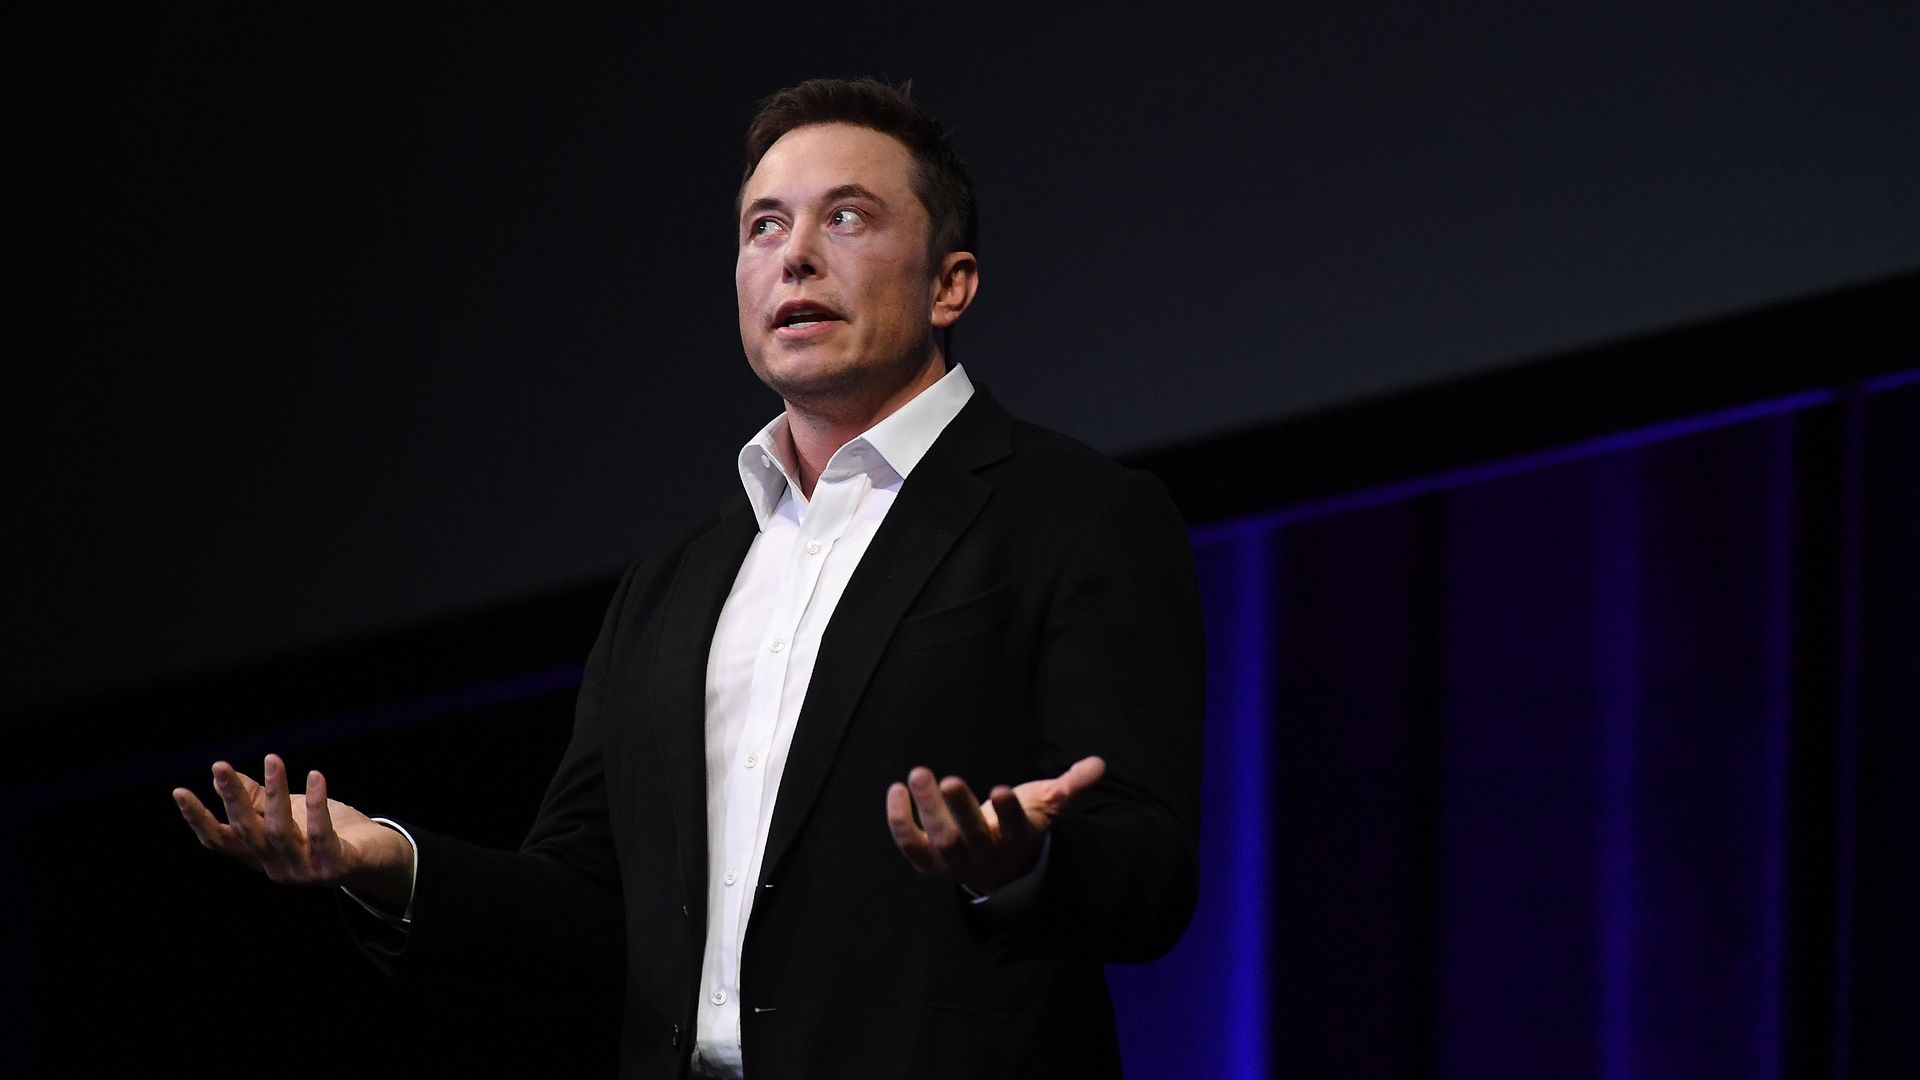 Elon Musk in a black suit, white shirt and no tie with both hands palms up talking